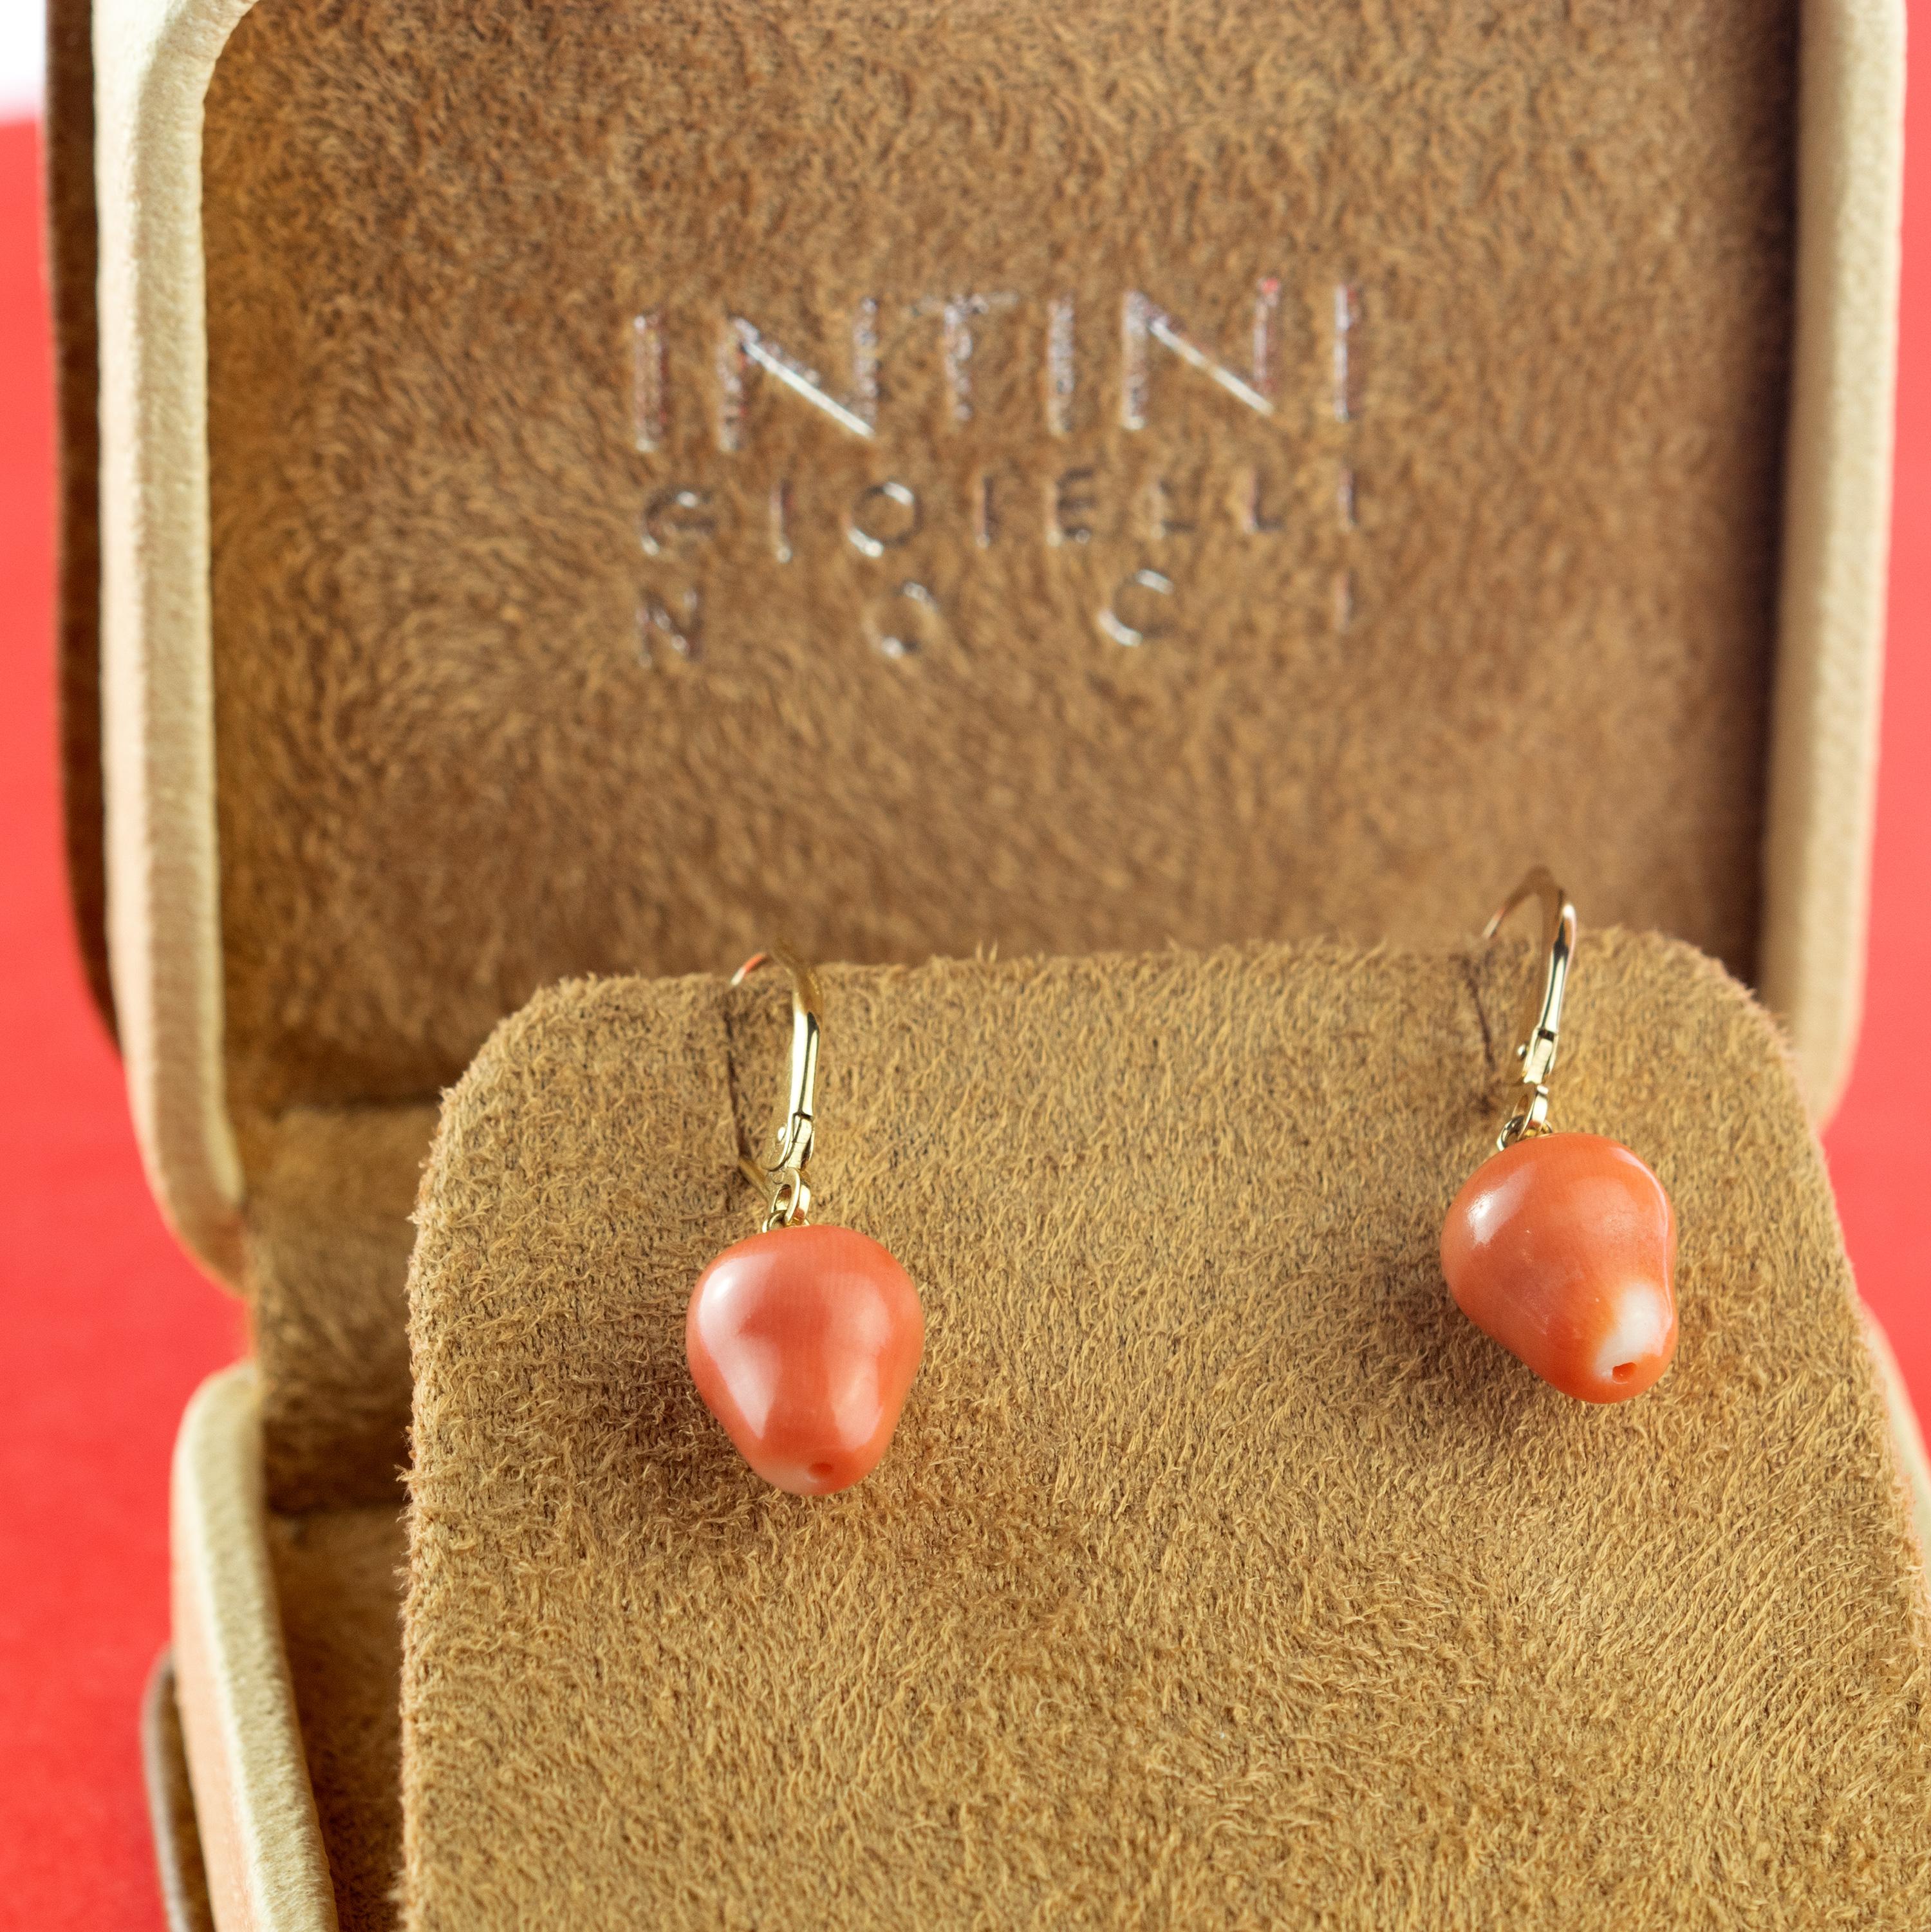 These breathtaking coral earrings have modern Leverback clousure design and the most precious stones. Unique fruit shaped elegant and contemporary jewels for a marvelous look, for an everyday touch of class and charm.

Made in Itale jewellery, with